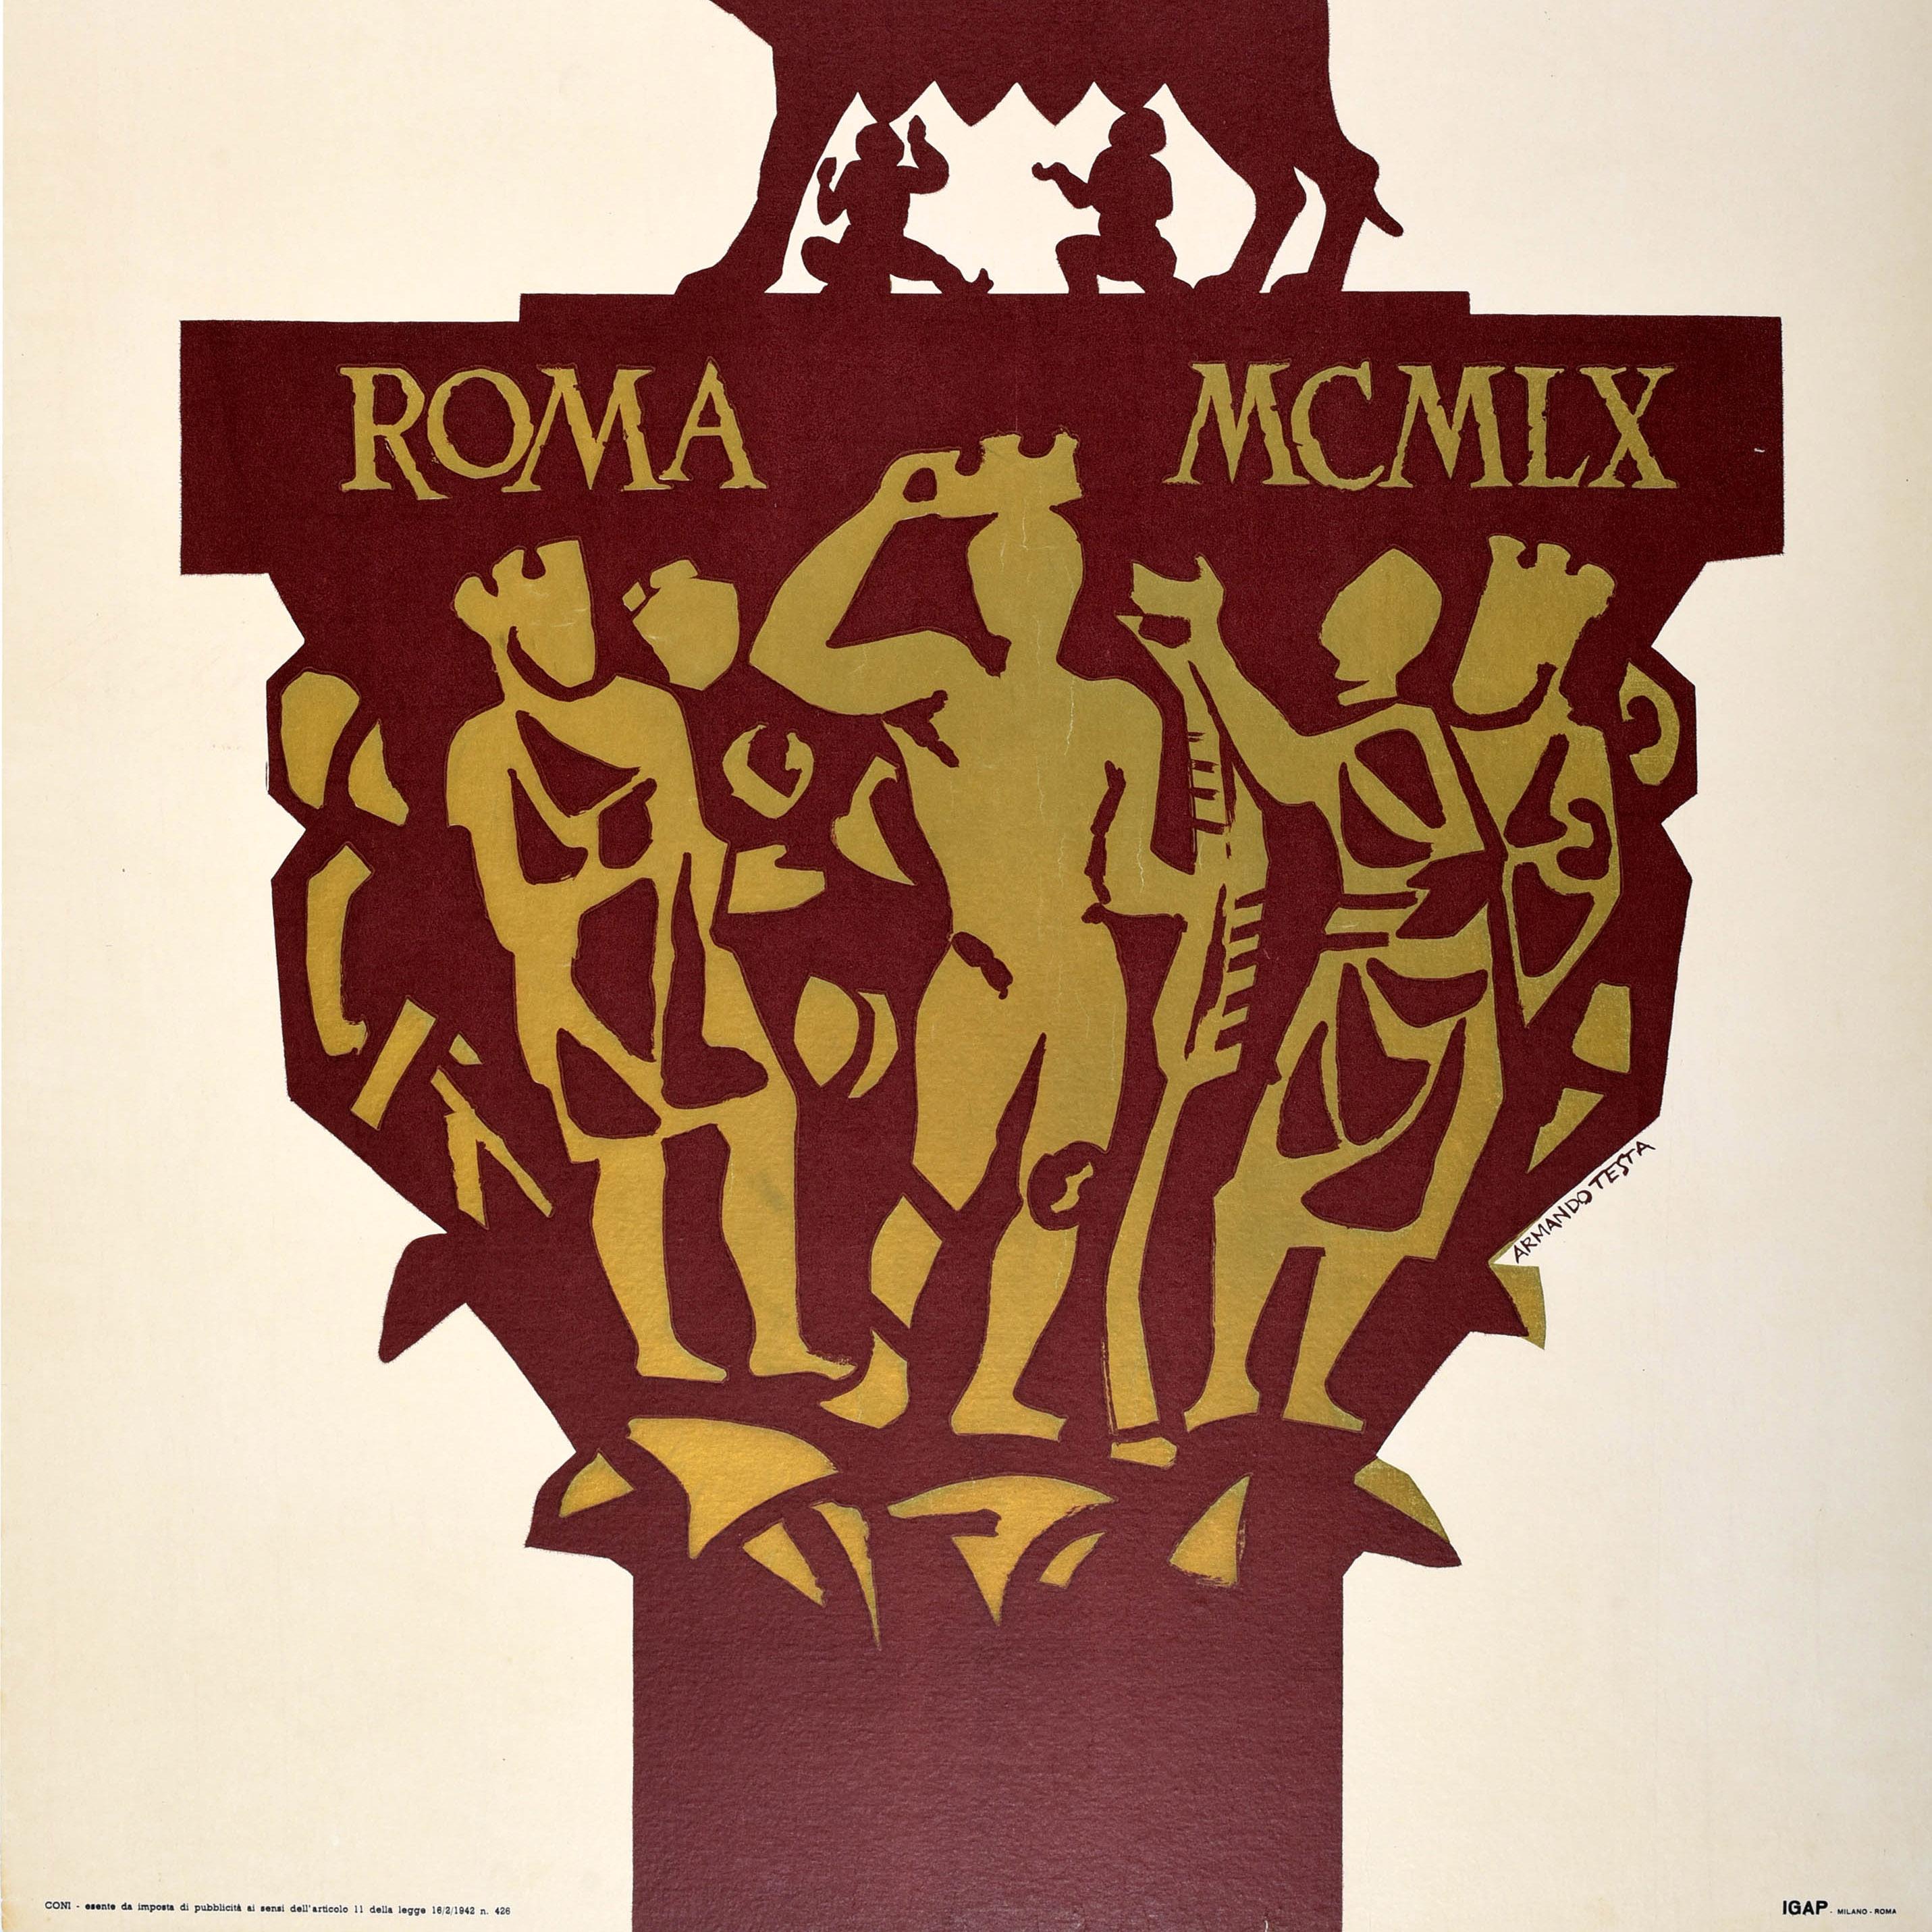 Very scarce original vintage sport poster for the XVII Olympic Games in Rome featuring a great design by Armando Testa (1917-1992) with a Russian text. Design depicts the twin brothers Romulus and Remus being suckled by the Capitoline Wolf (the